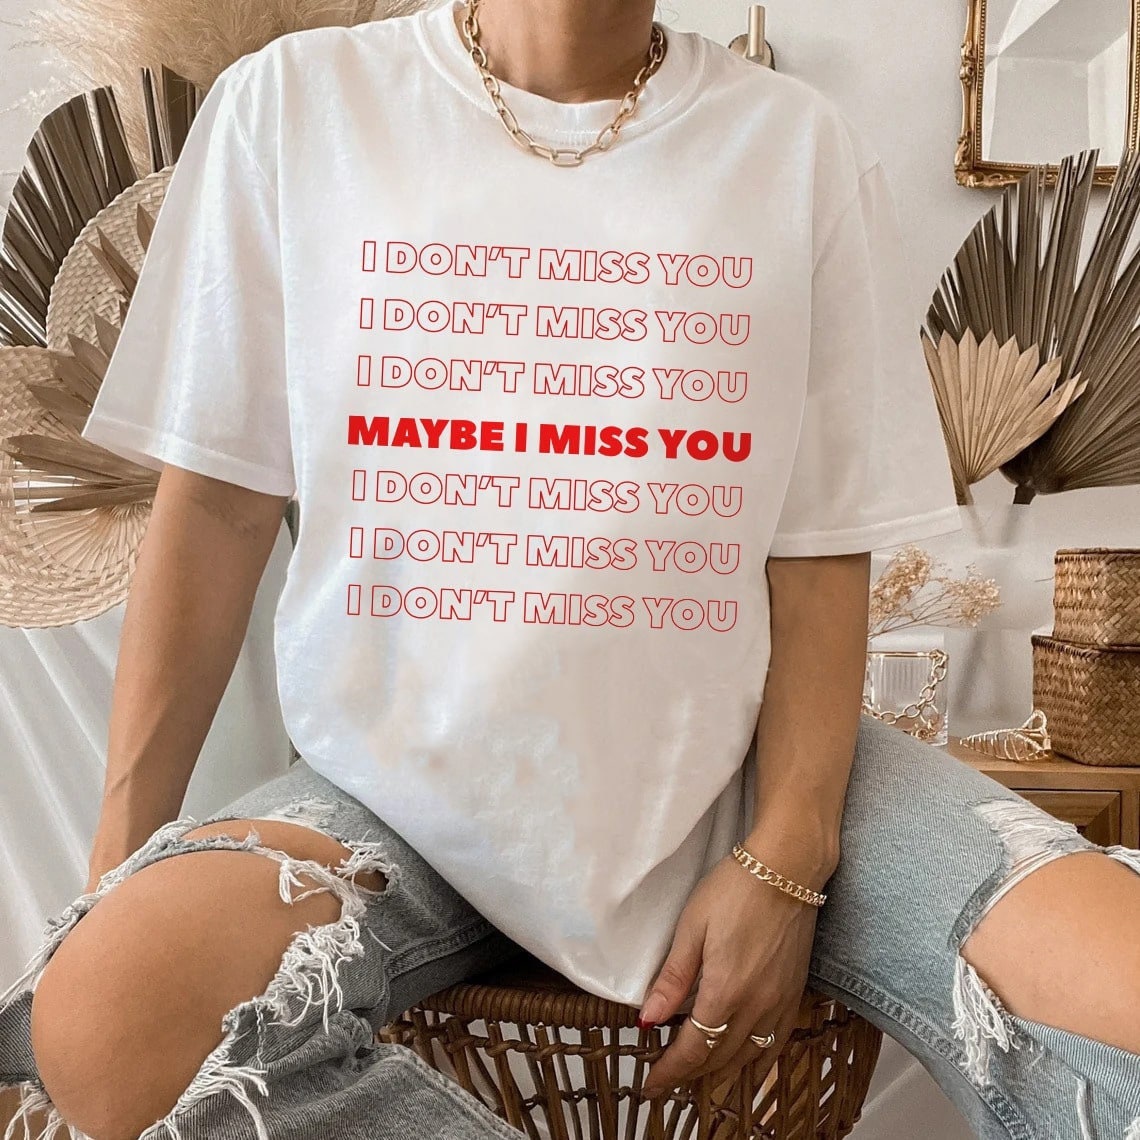 Maybe I Miss You Louis Shirt, Louis Tomlinson T Shirt